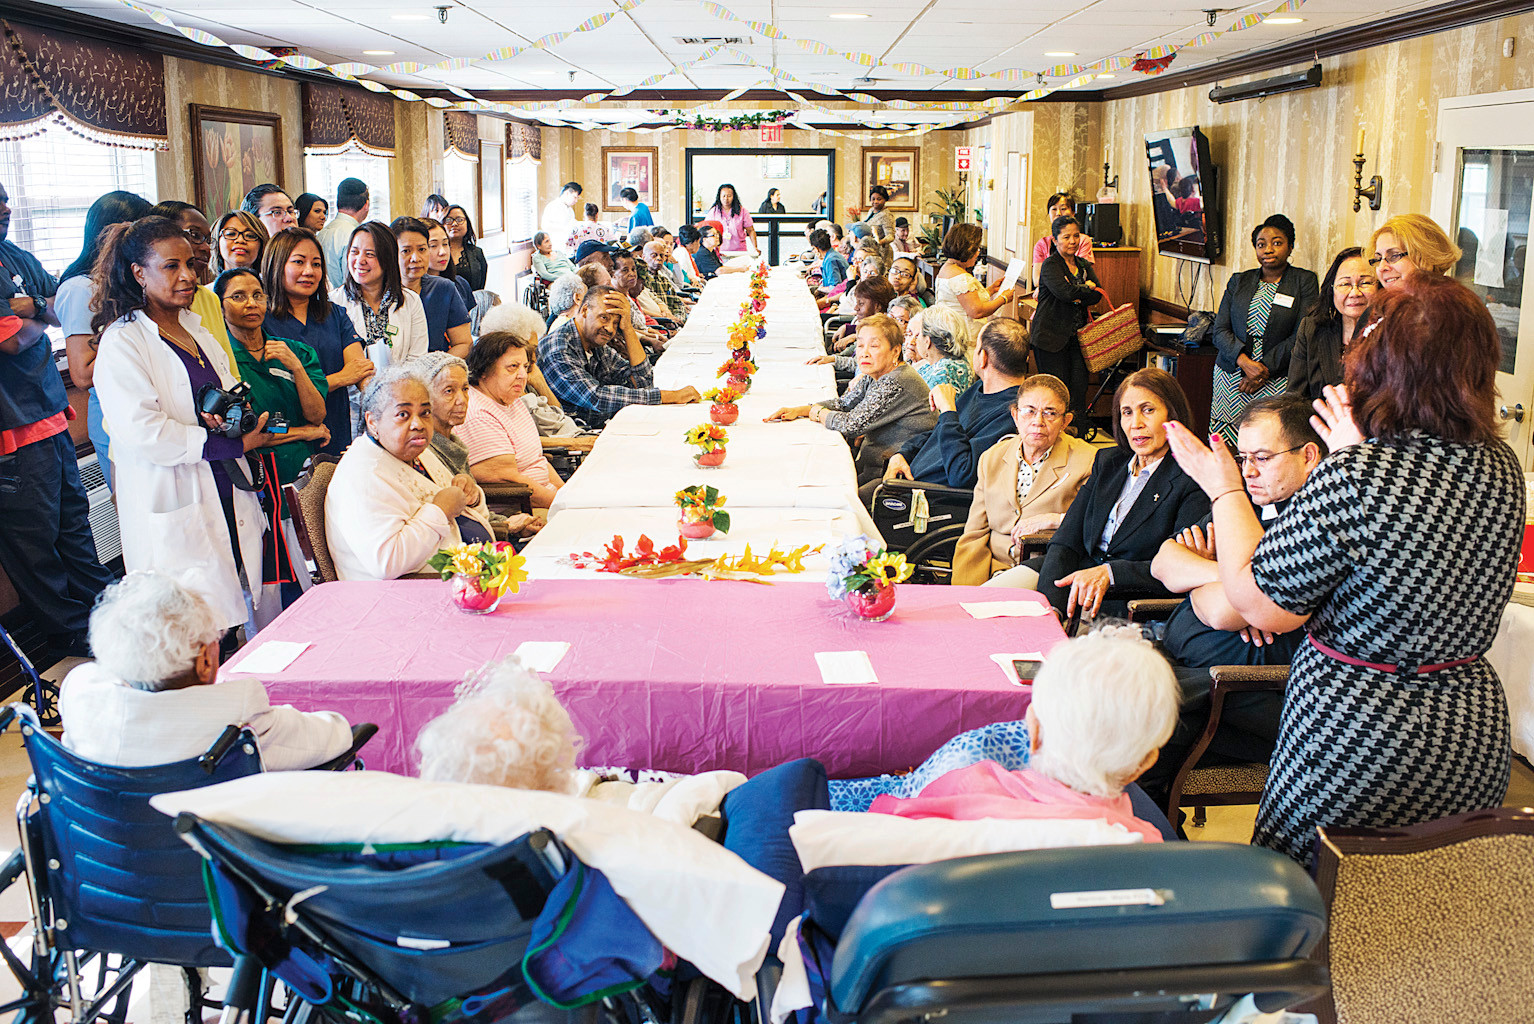 Faculty and residents gather for the birthday party of three centenarians, Carmen Benitez, 101, Bernice King, 108, and Maria Martinez, 103, in the Manhattanville Health Care center in Kingsbridge, on April 17.